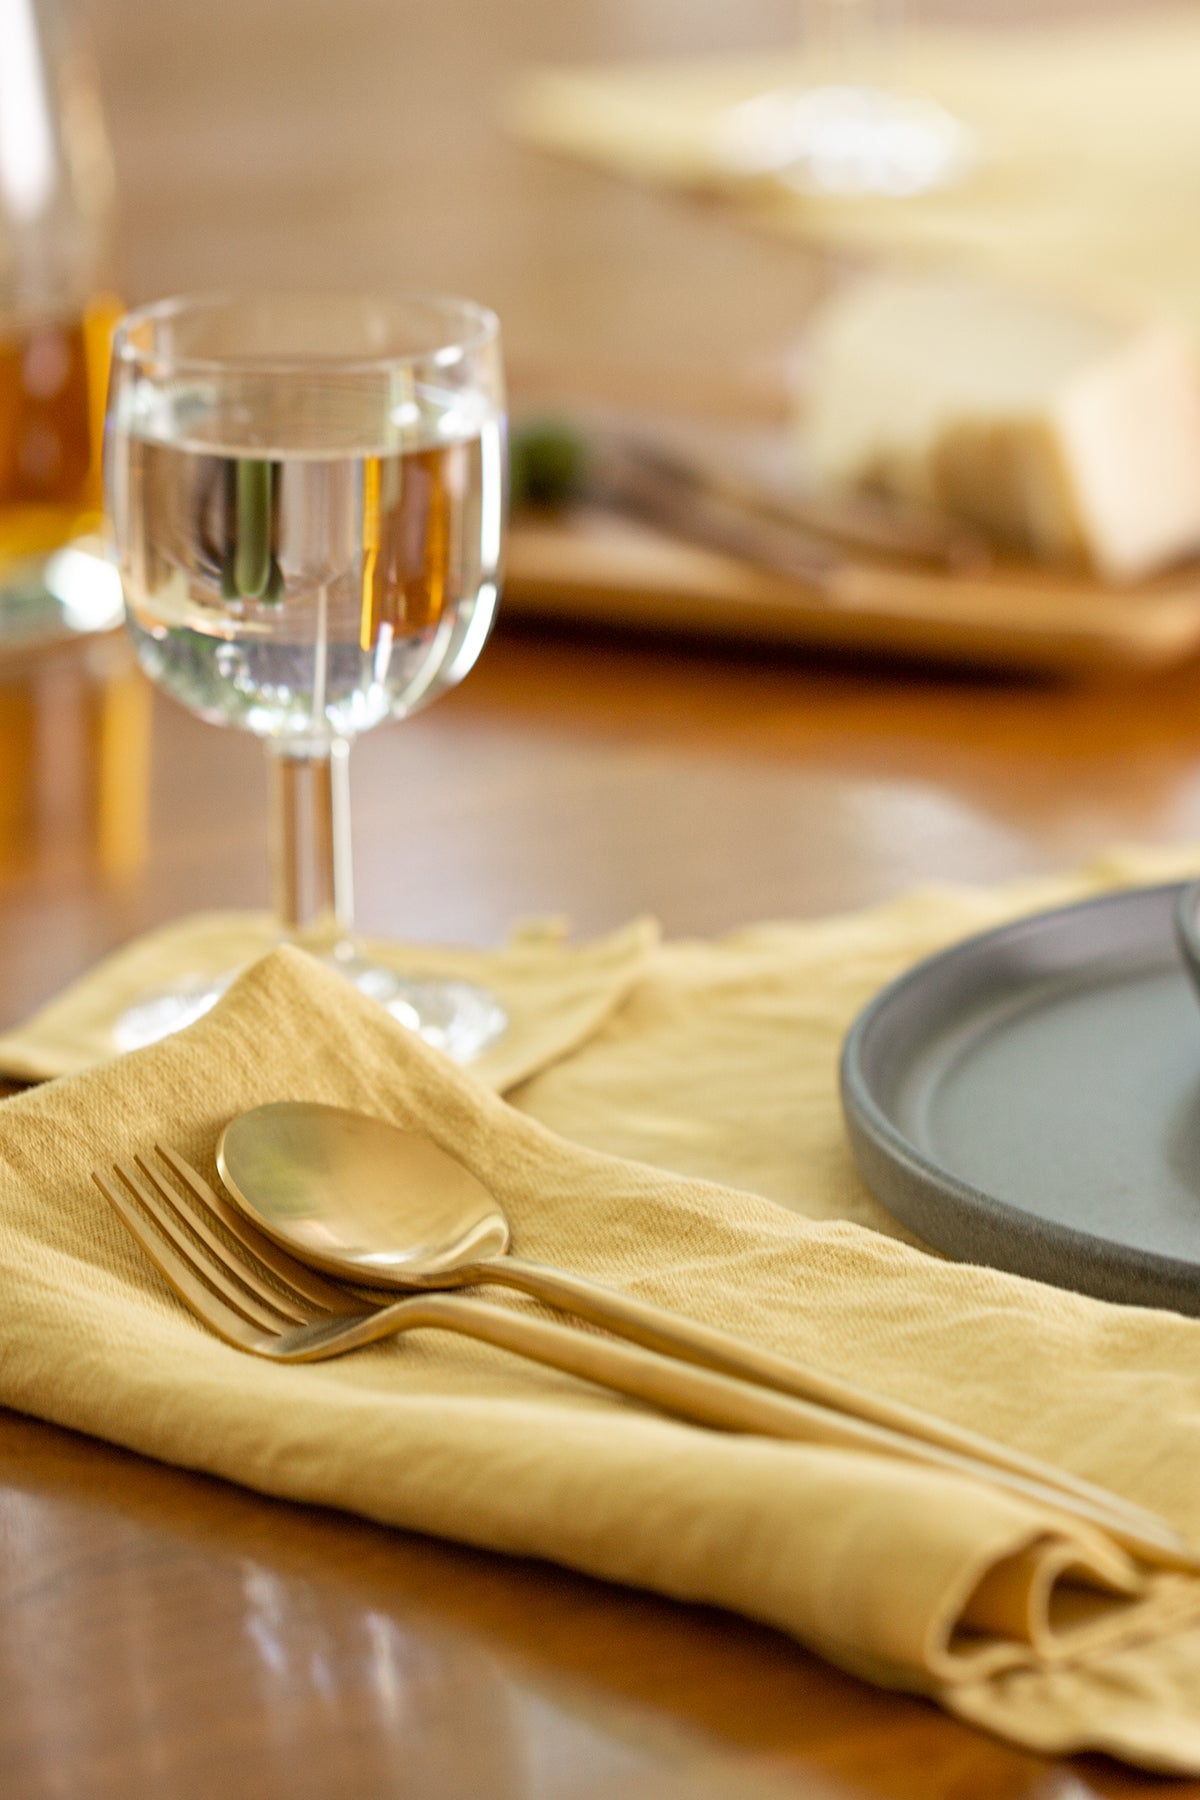   A neatly set dining table with an elegant yellow Jenny Graham Home linen napkin, a spoon, and a glass of water, with blurry plates and a meal in the background. 